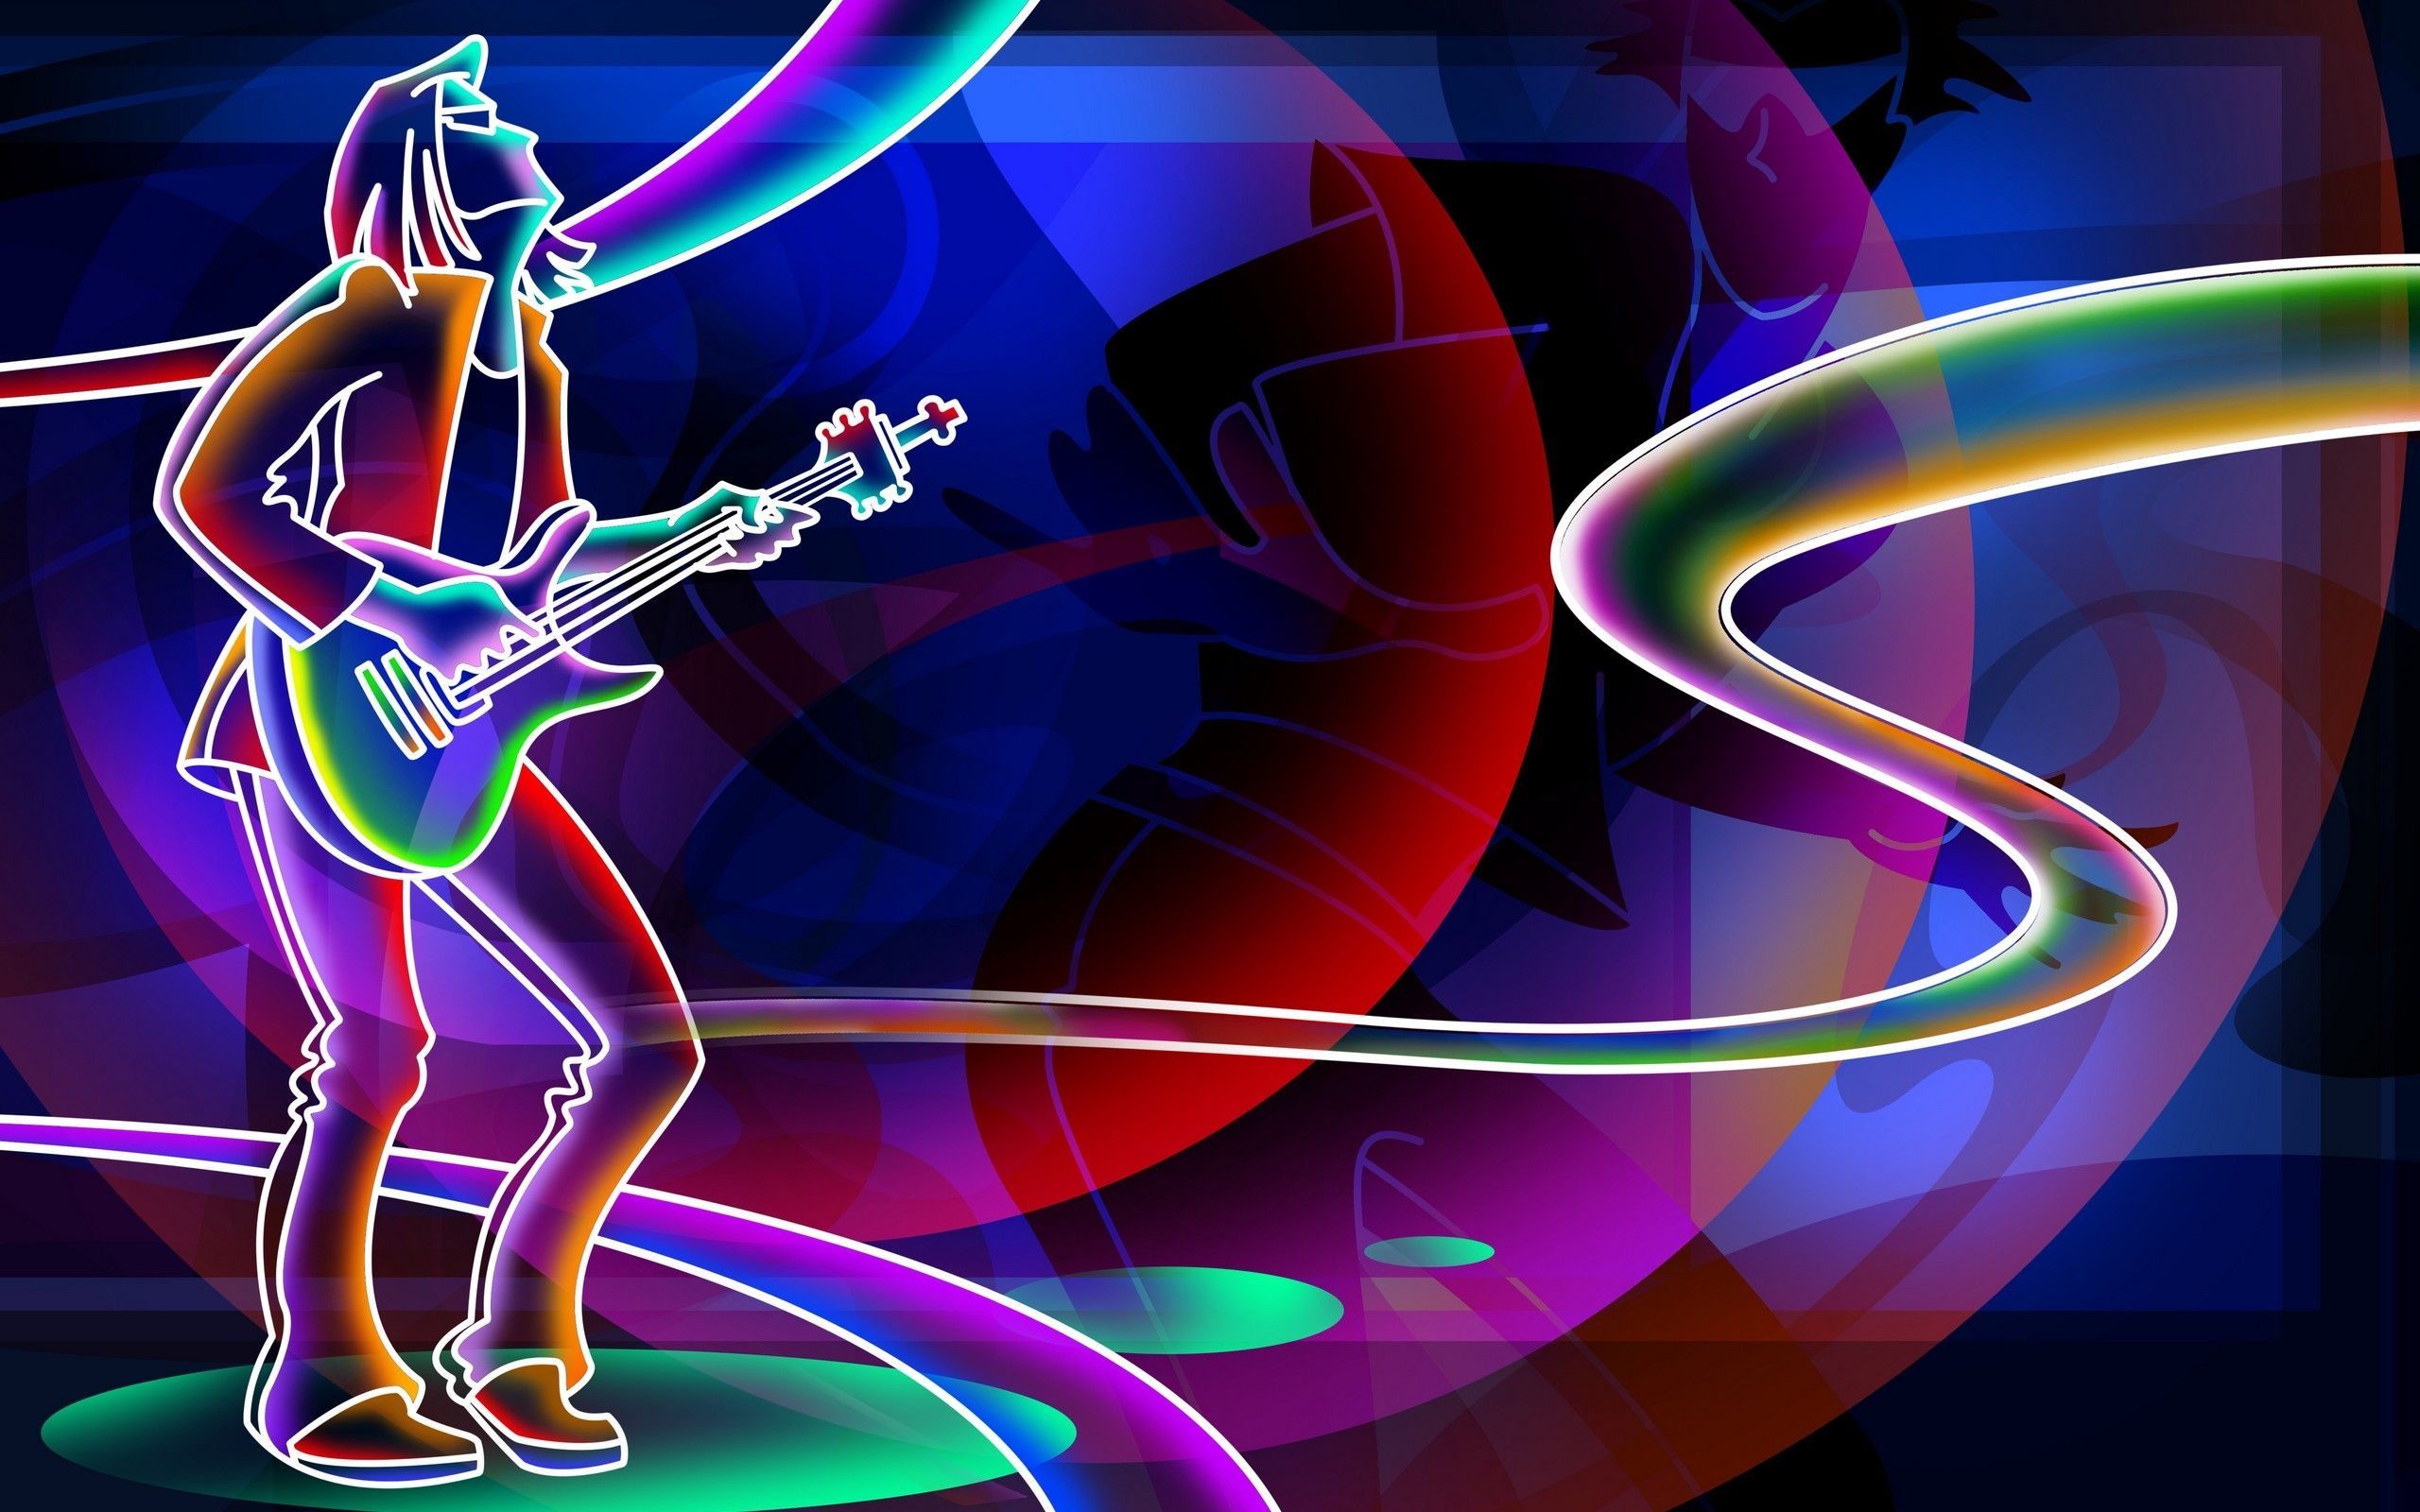 2560x1600 Neon wallpaper - 3D neon colorful Wallpapers - HD Wallpapers 94619